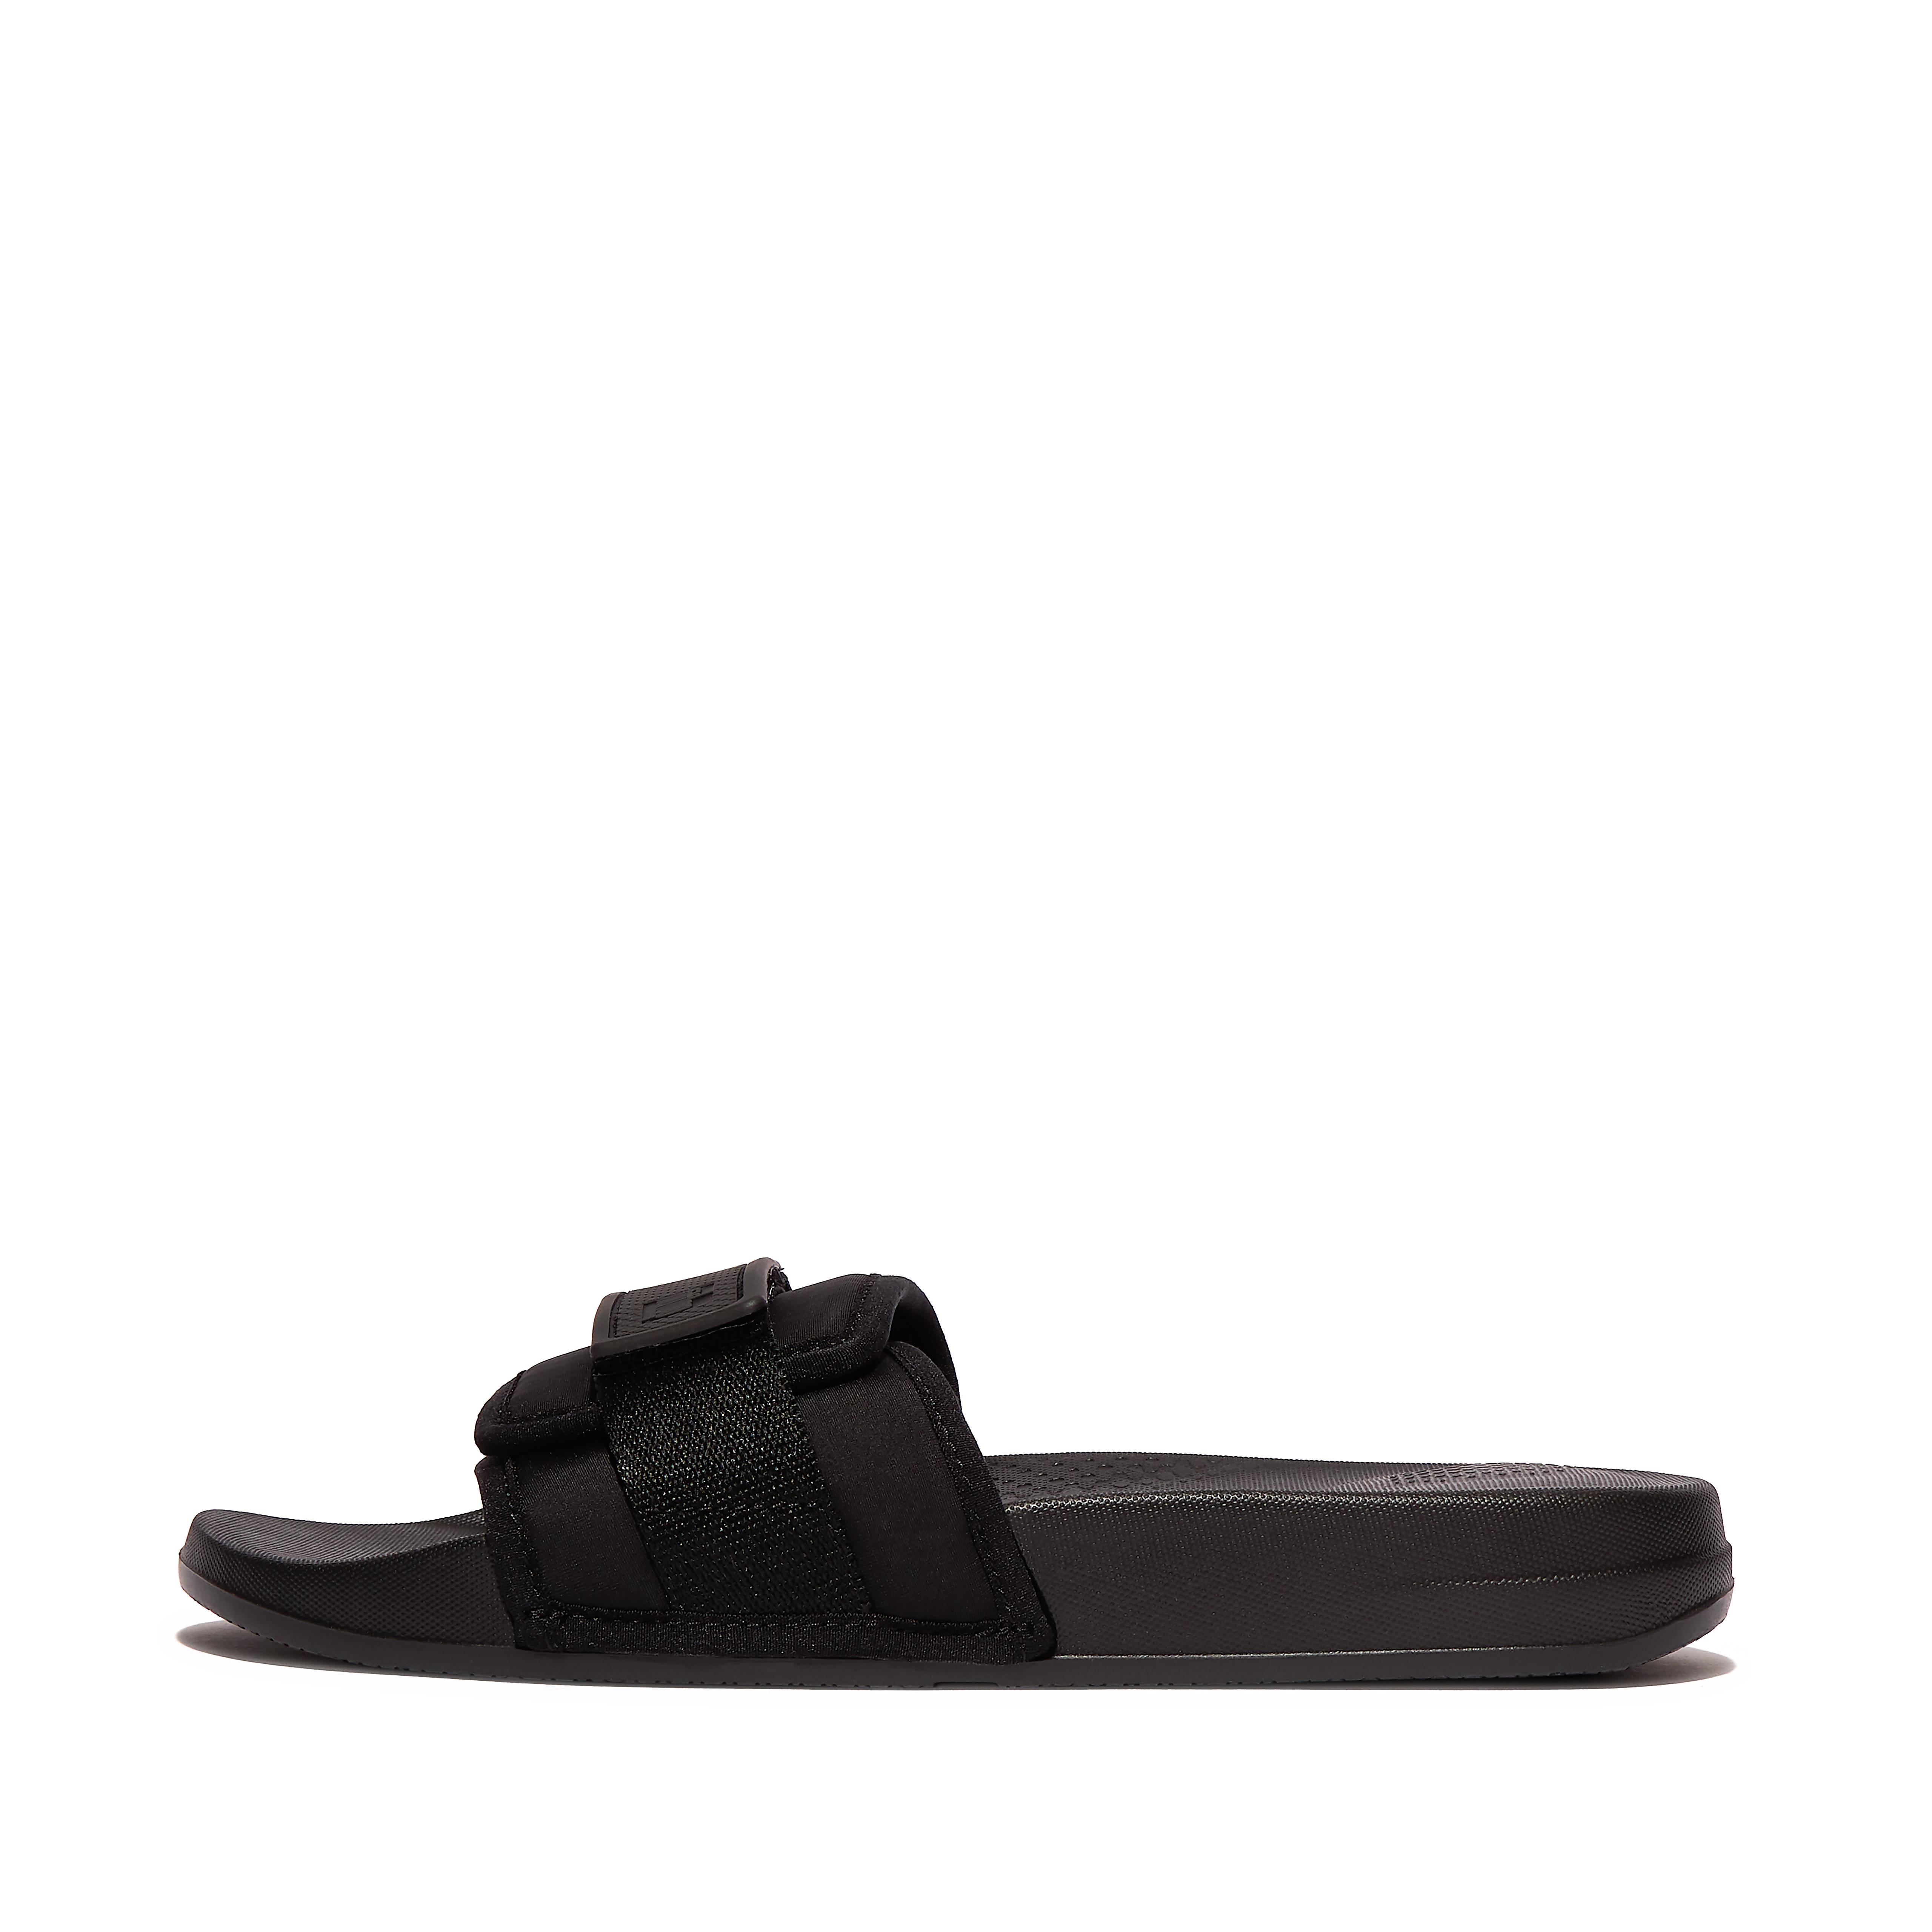 Women's iQushion Adjustable Pool Slides | FitFlop US